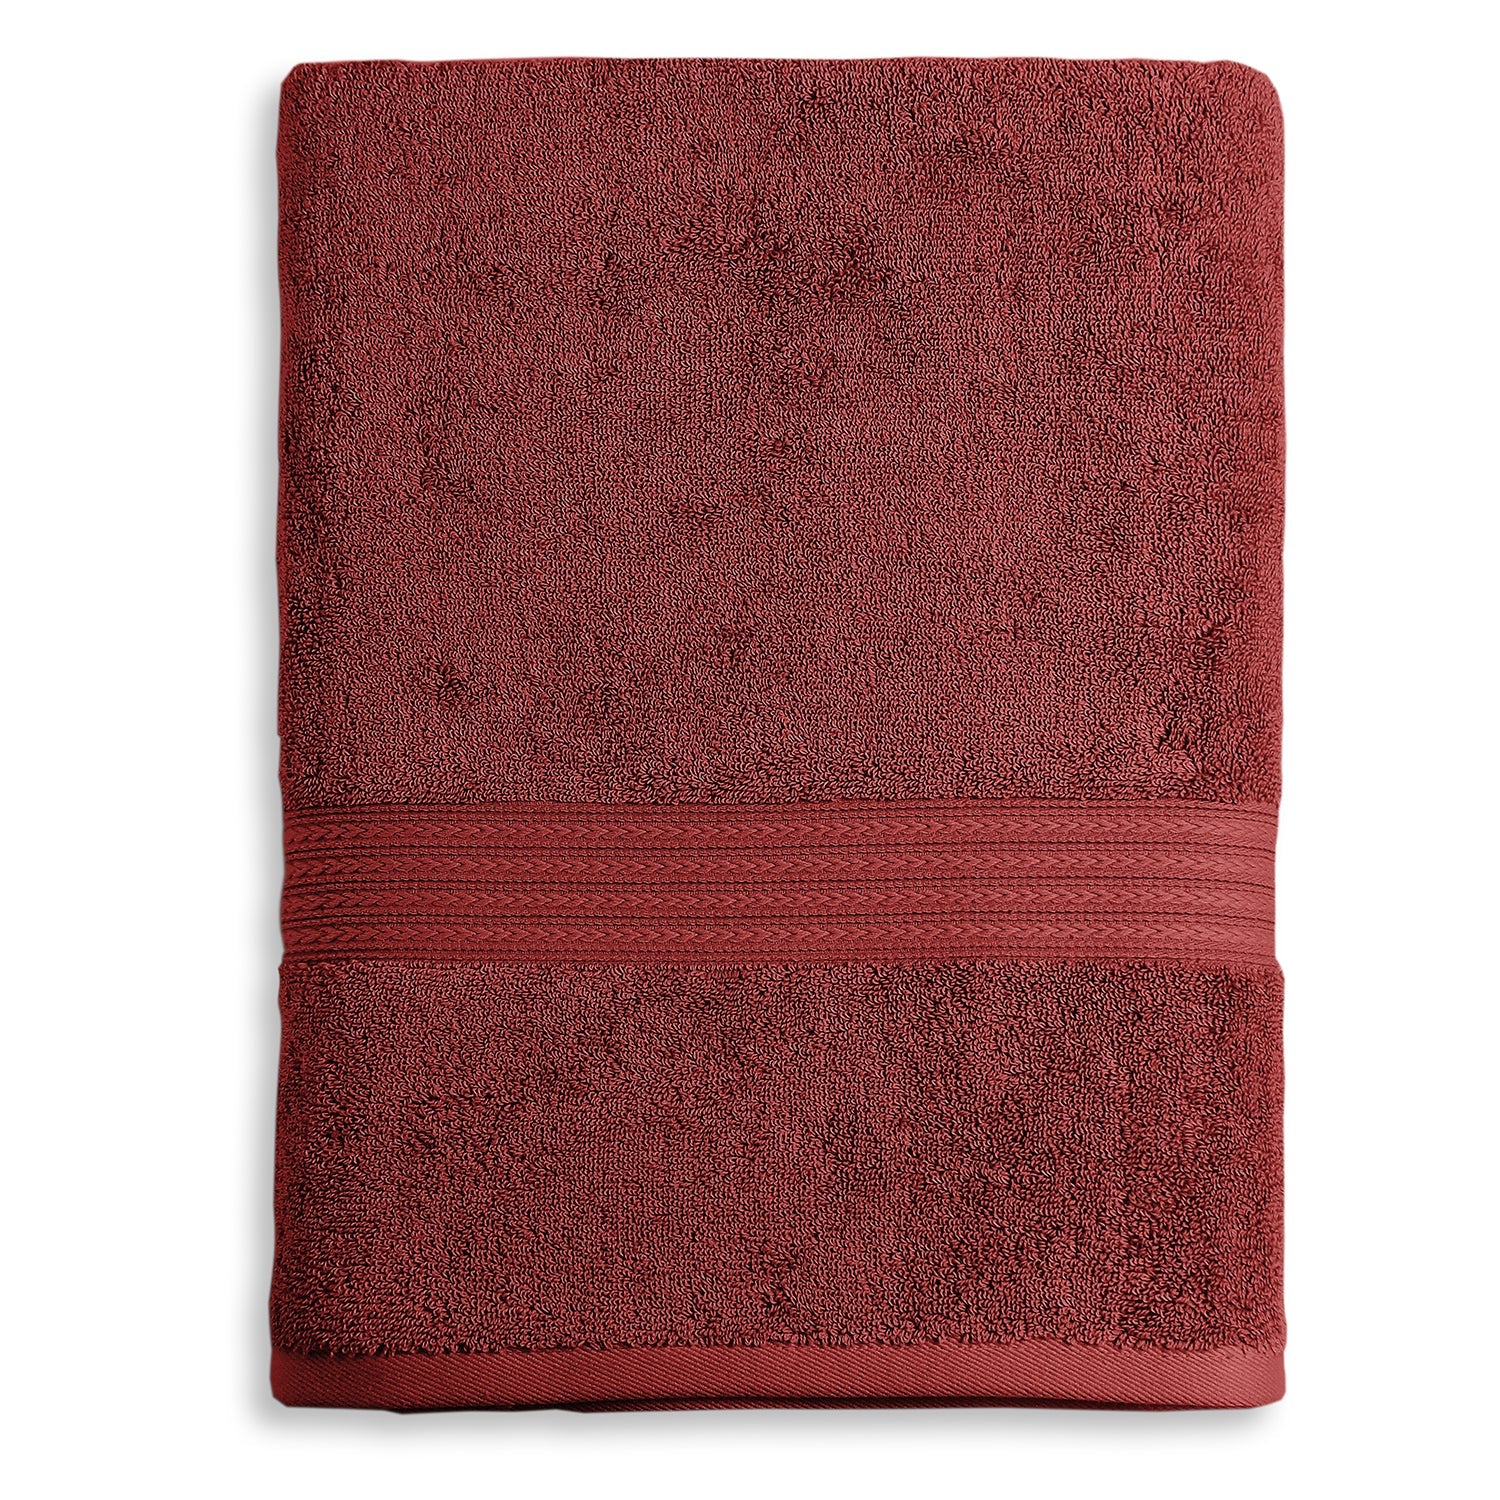 Bedded Bliss offers Bell Tempo by Matouk, luxury bath towels in